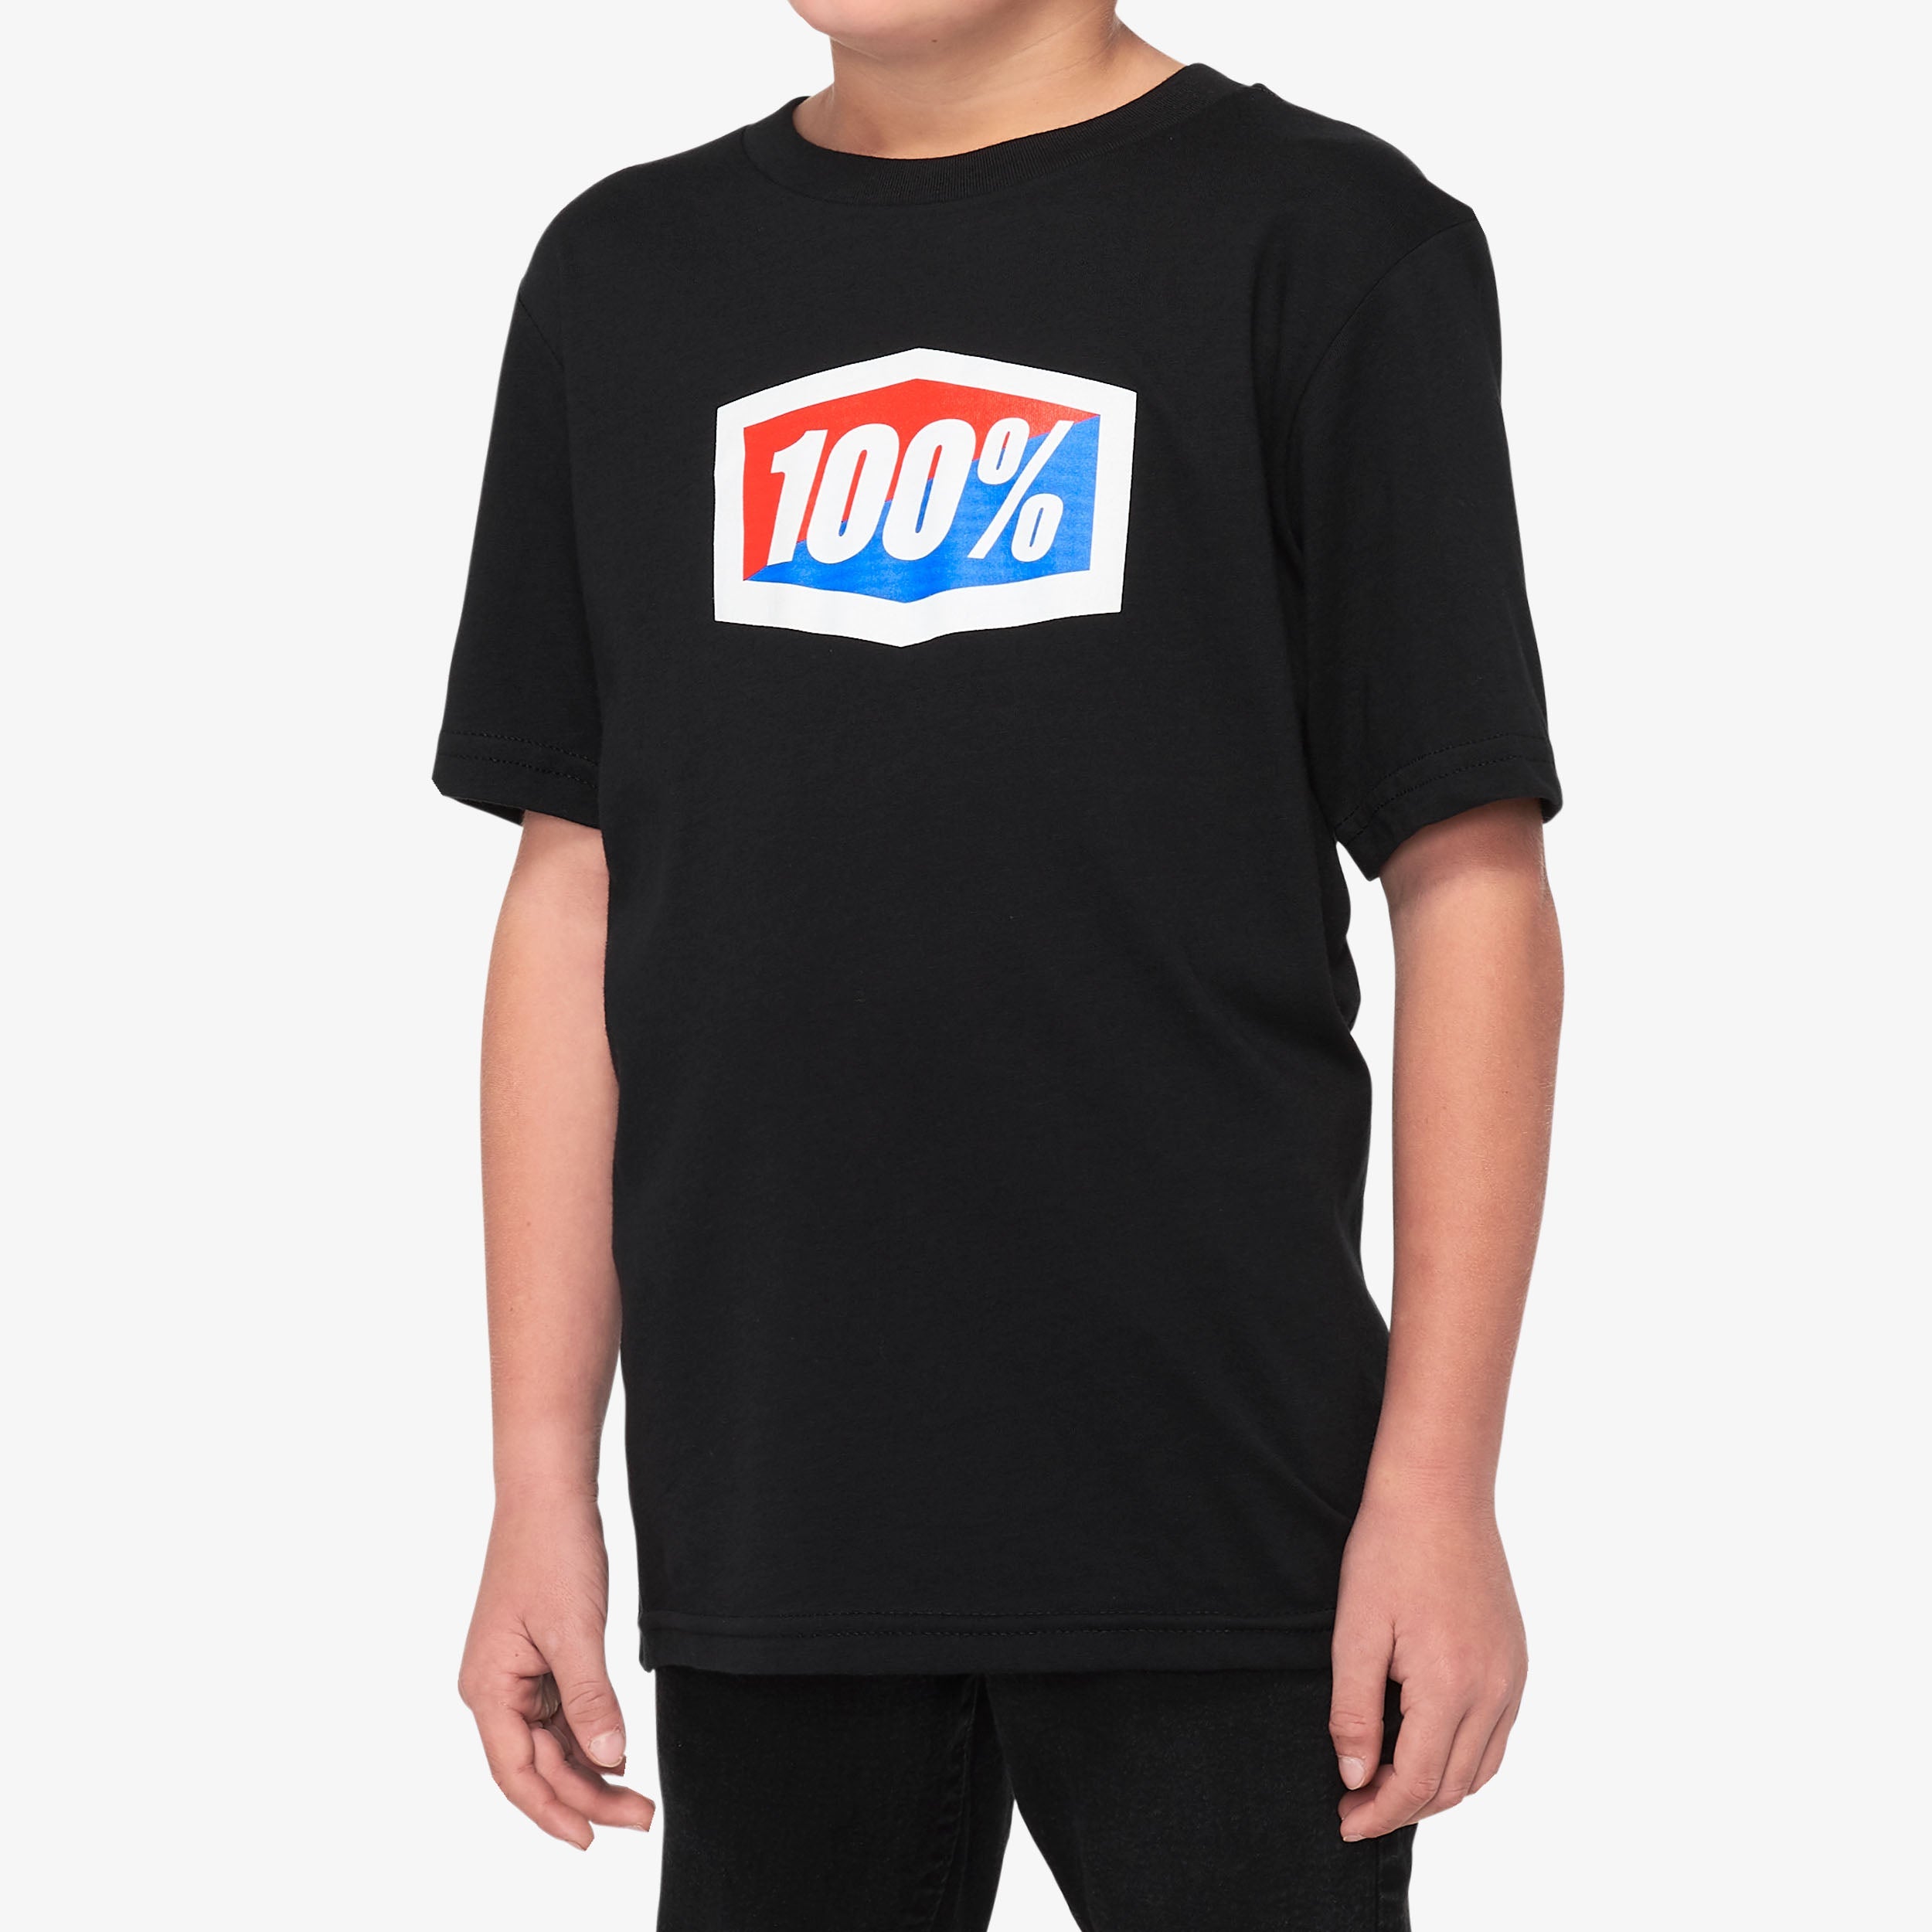 OFFICIAL Youth Short Sleeve Tee Black